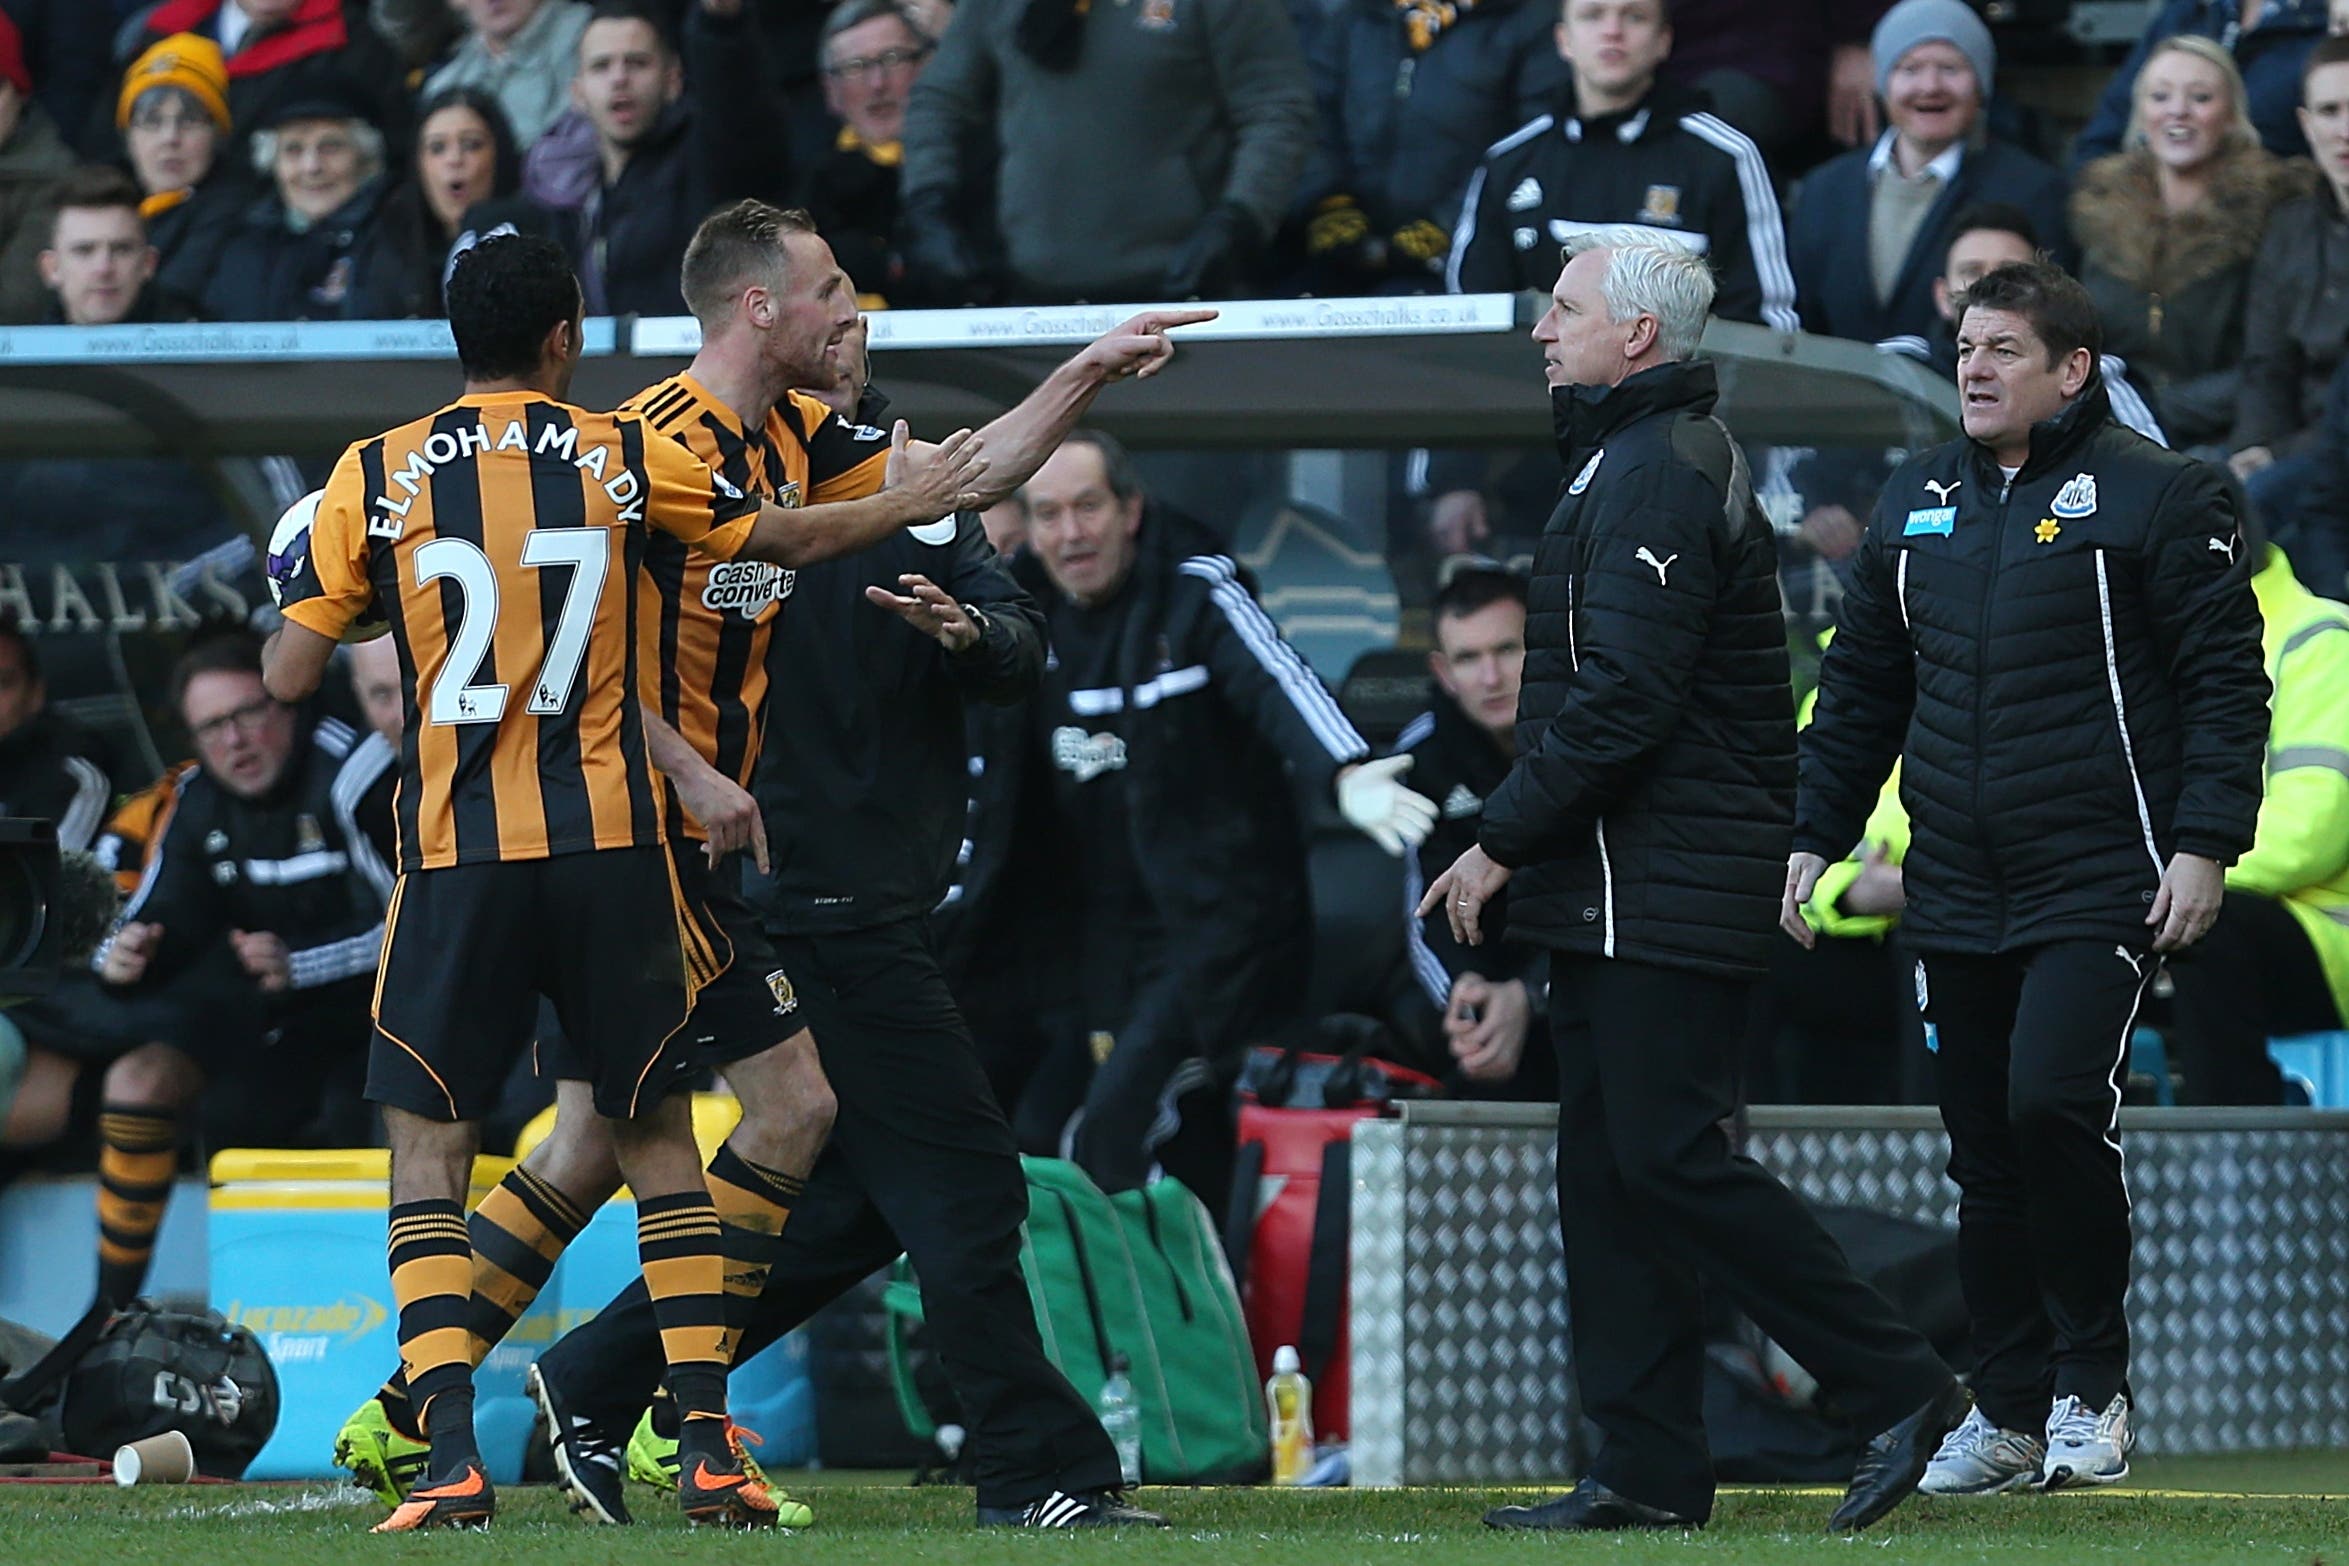 Newcastle manager Alan Pardew, second right, confronts Hull midfielder David Meyler, left, in a 2014 incident that saw him suspended for seven games (Lynne Cameron/PA)